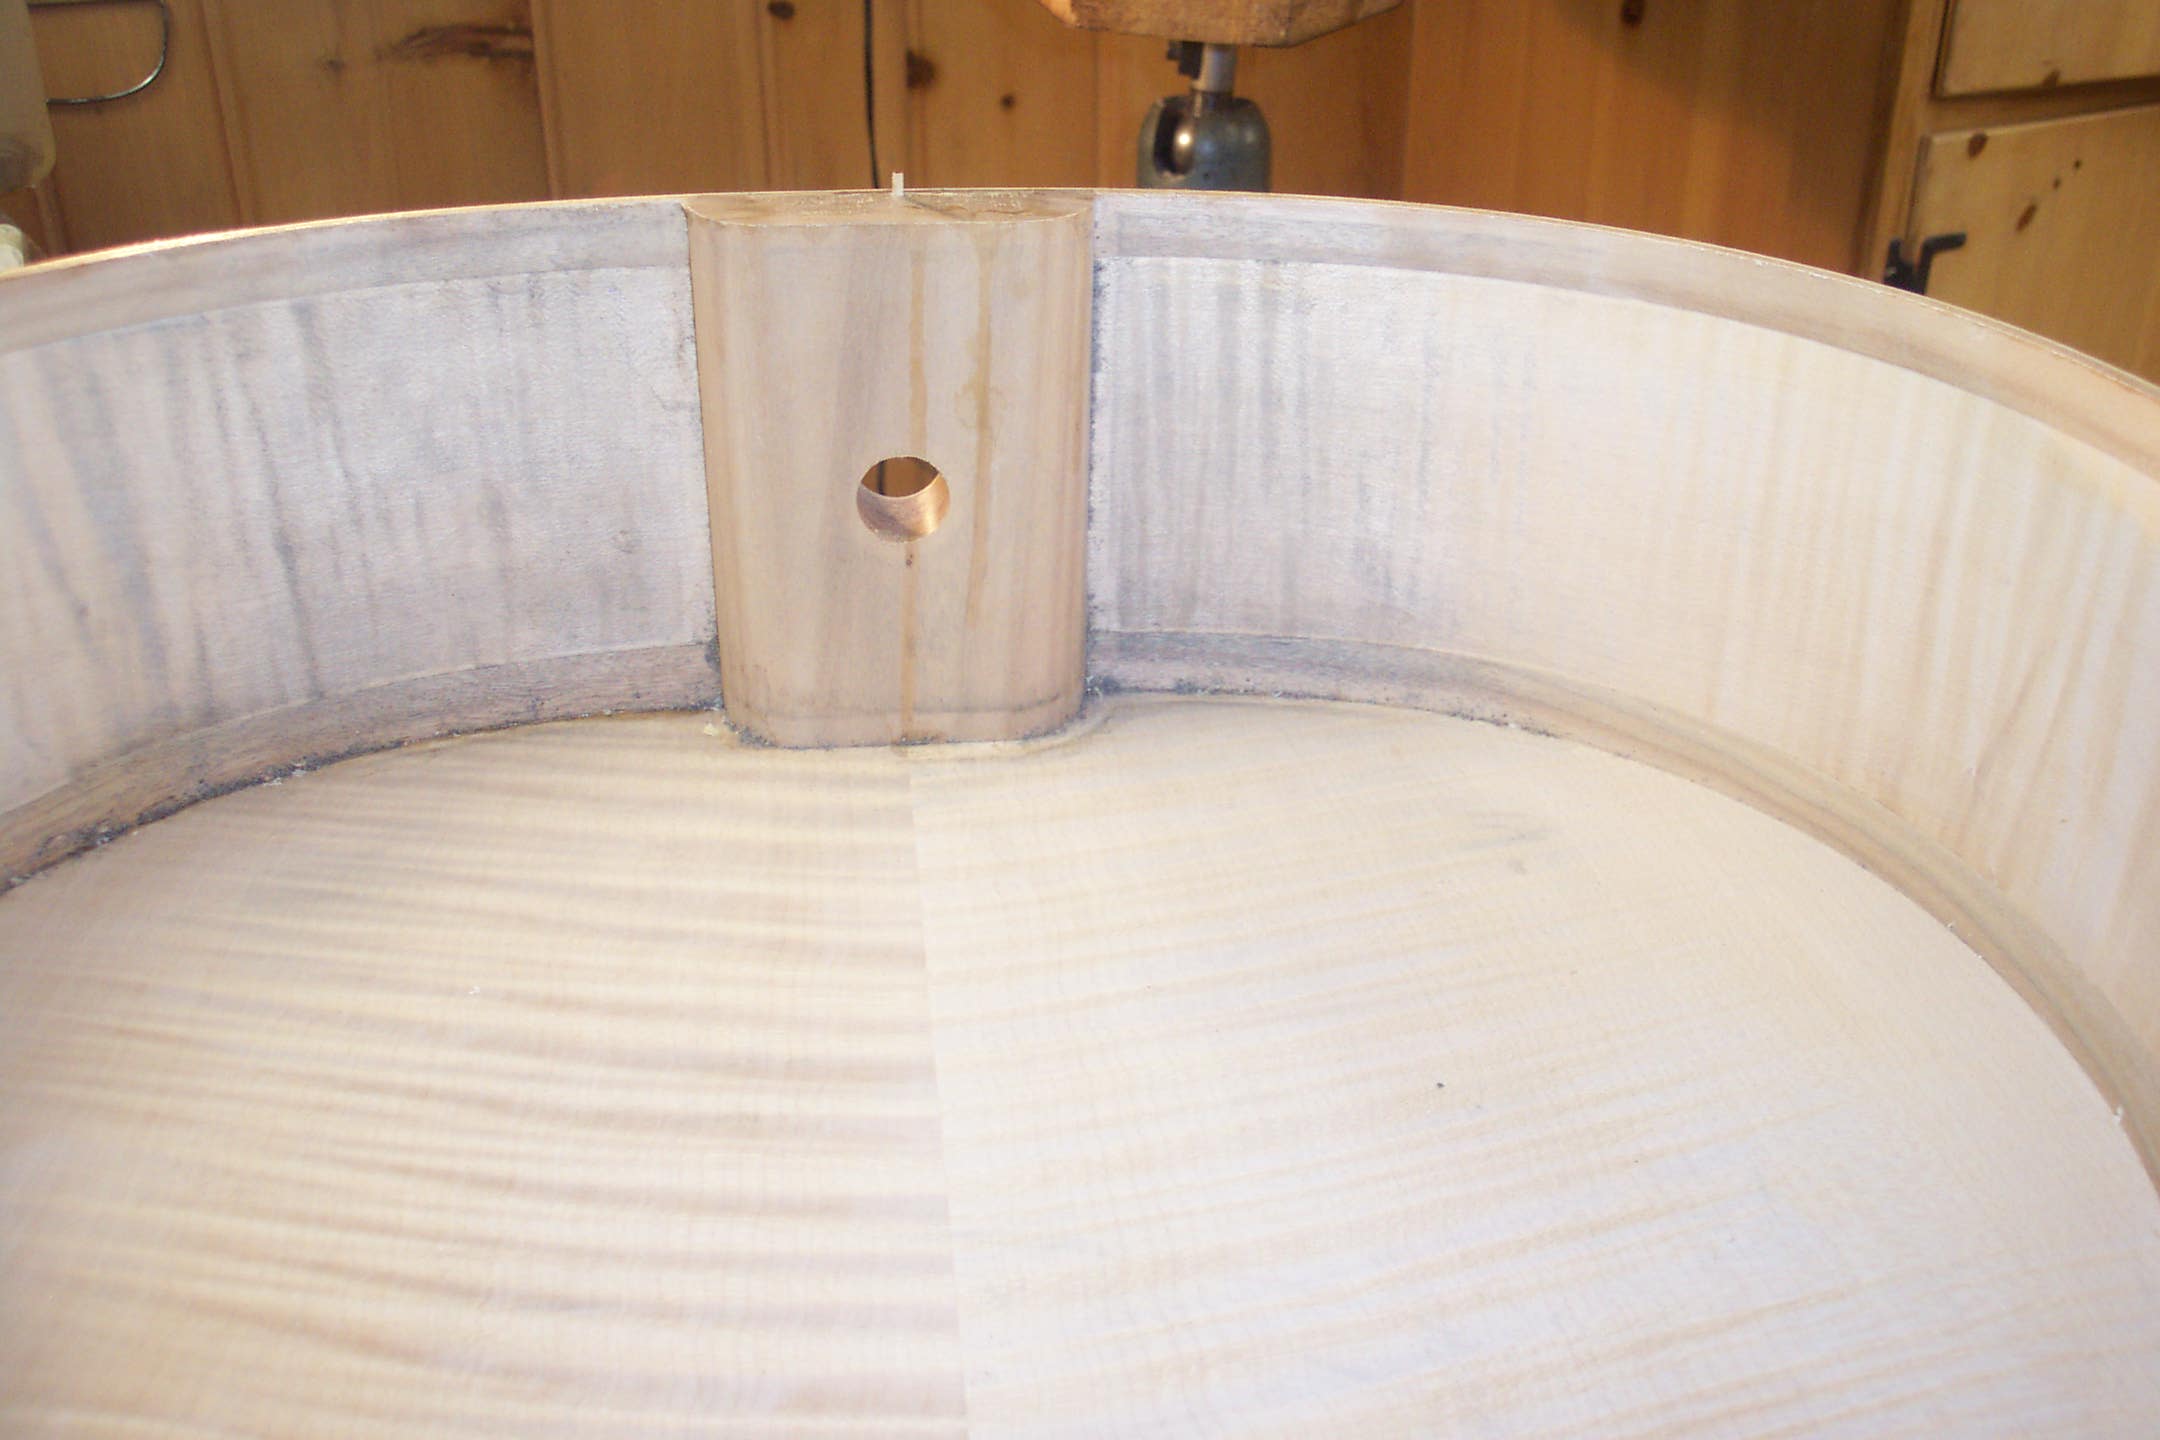 This is a picture of the inside of a cello where a snake type humidifier was used, showing discoloration from dripping water. This is not uncommon.